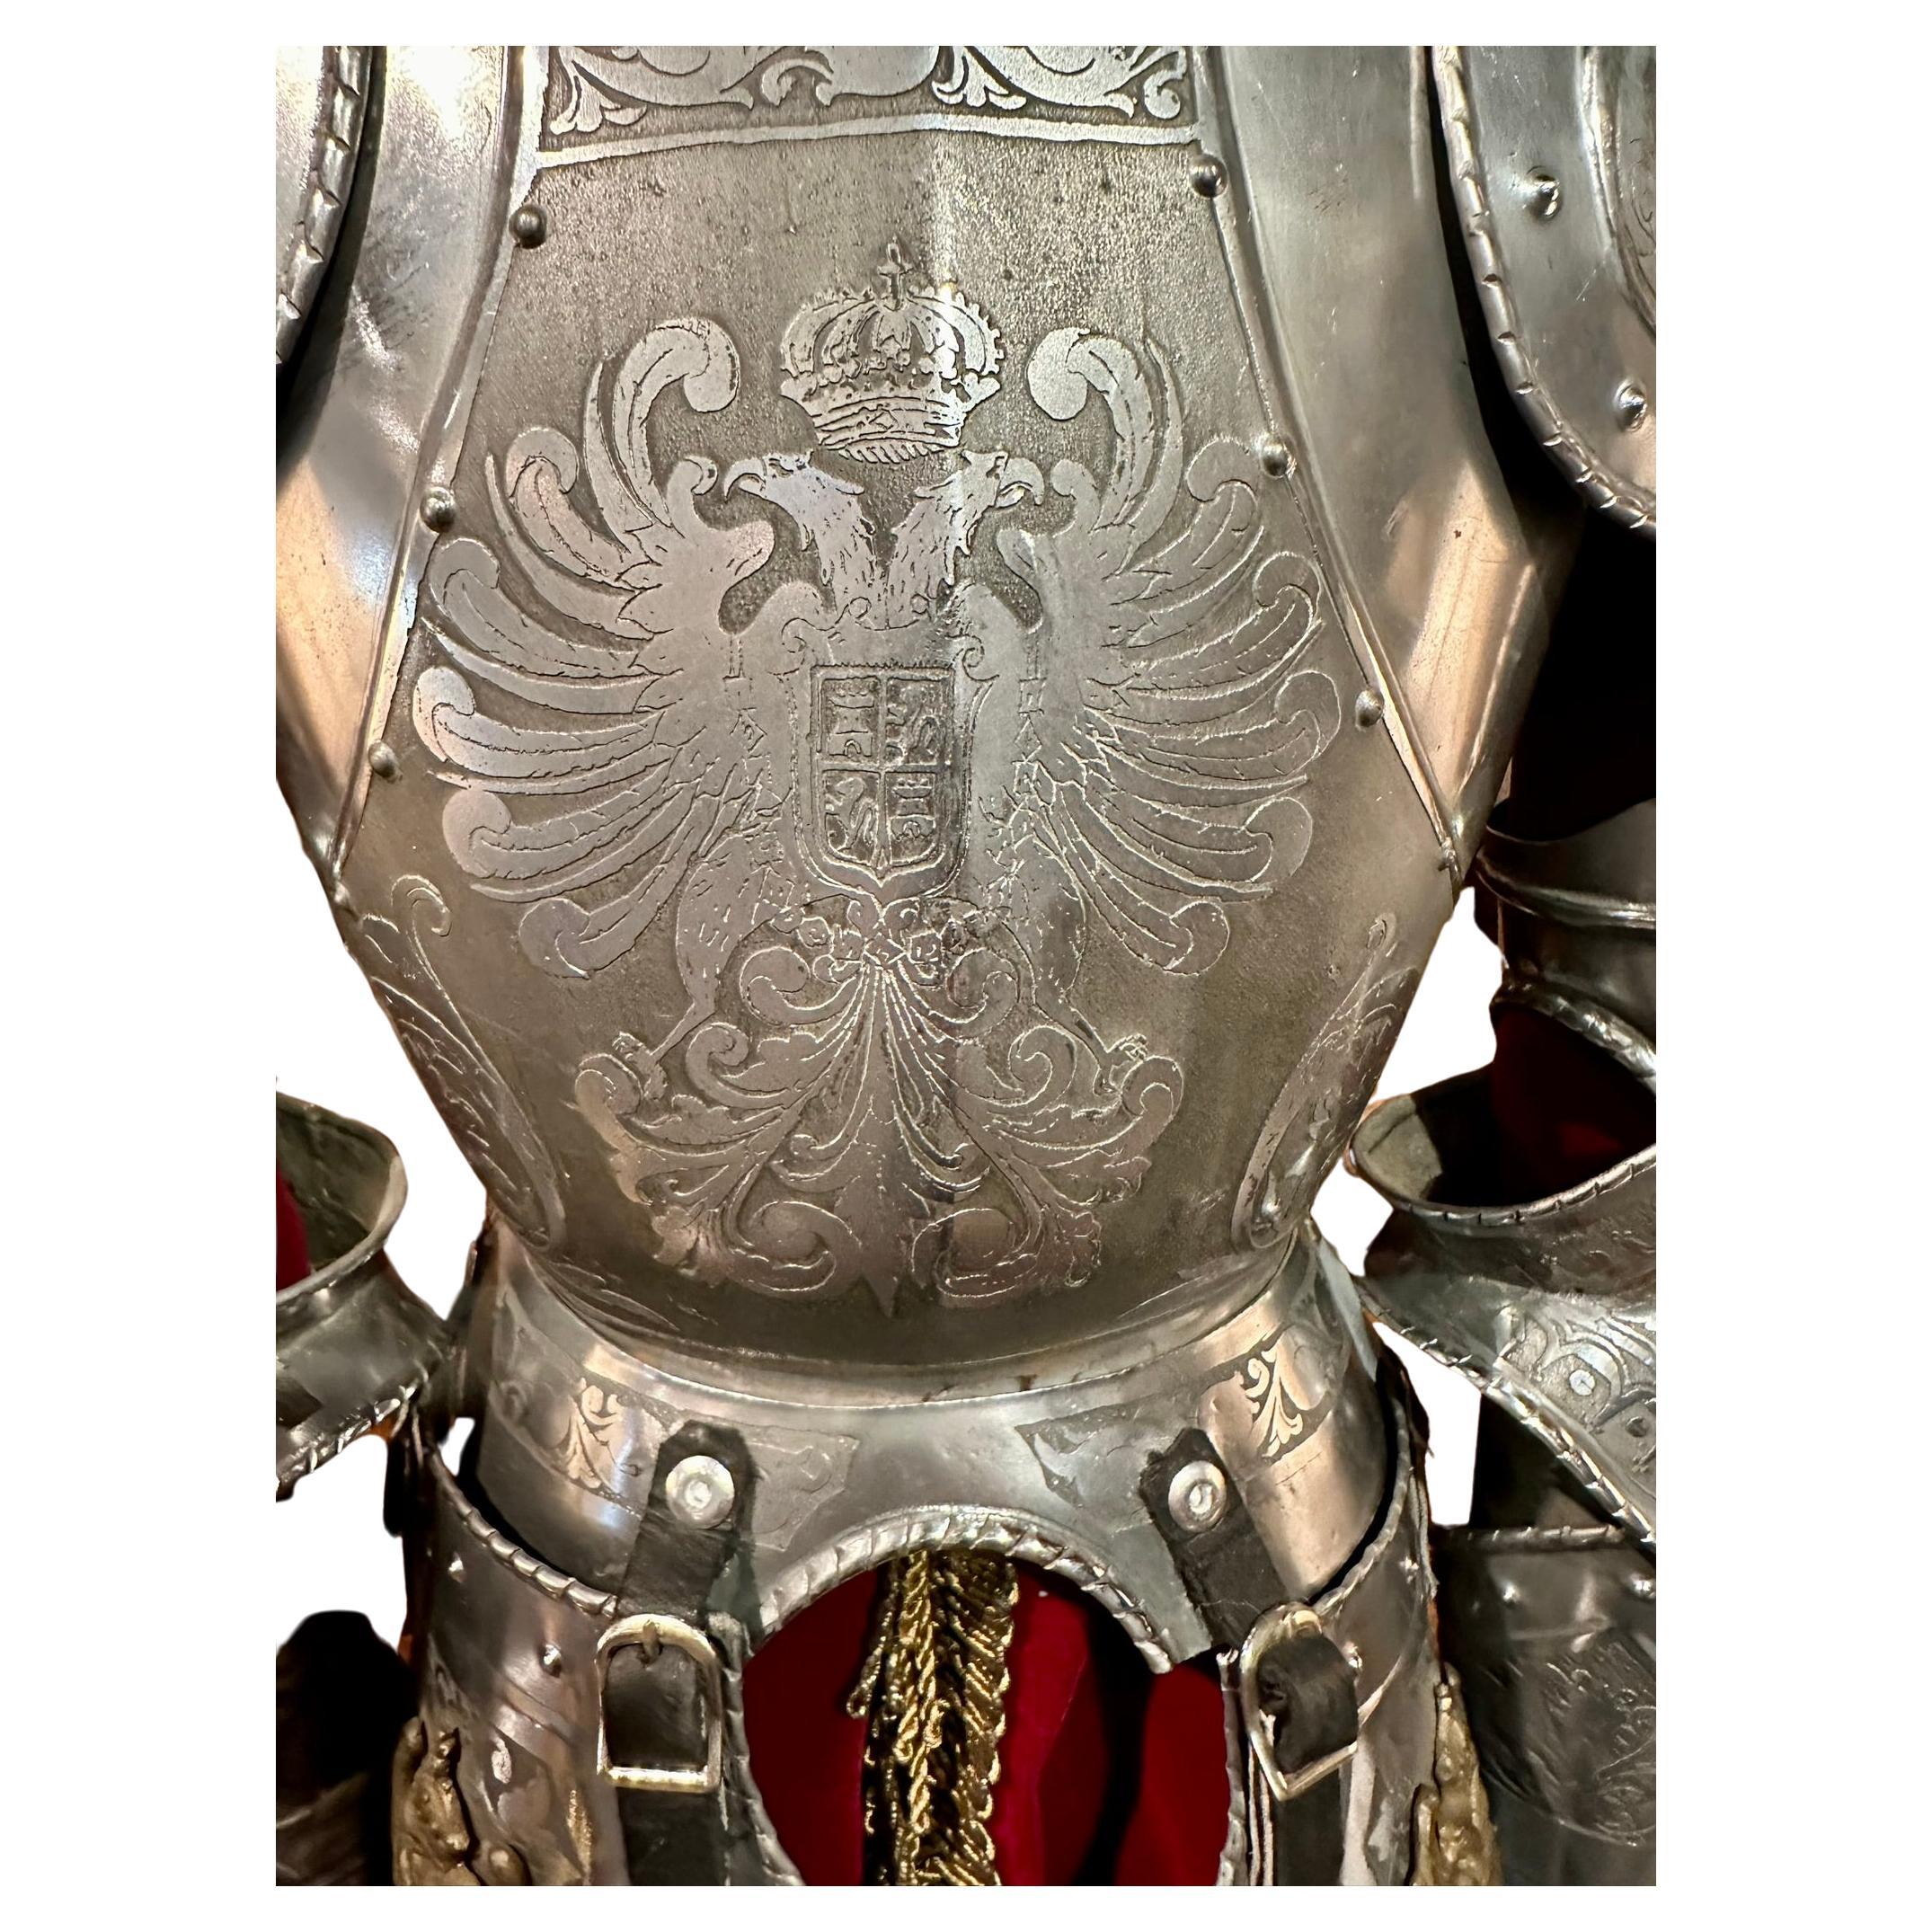 Steel Hand-Made Miniature Model Cavalier Coat of Arms, Hinged Medieval Knight's Armor For Sale